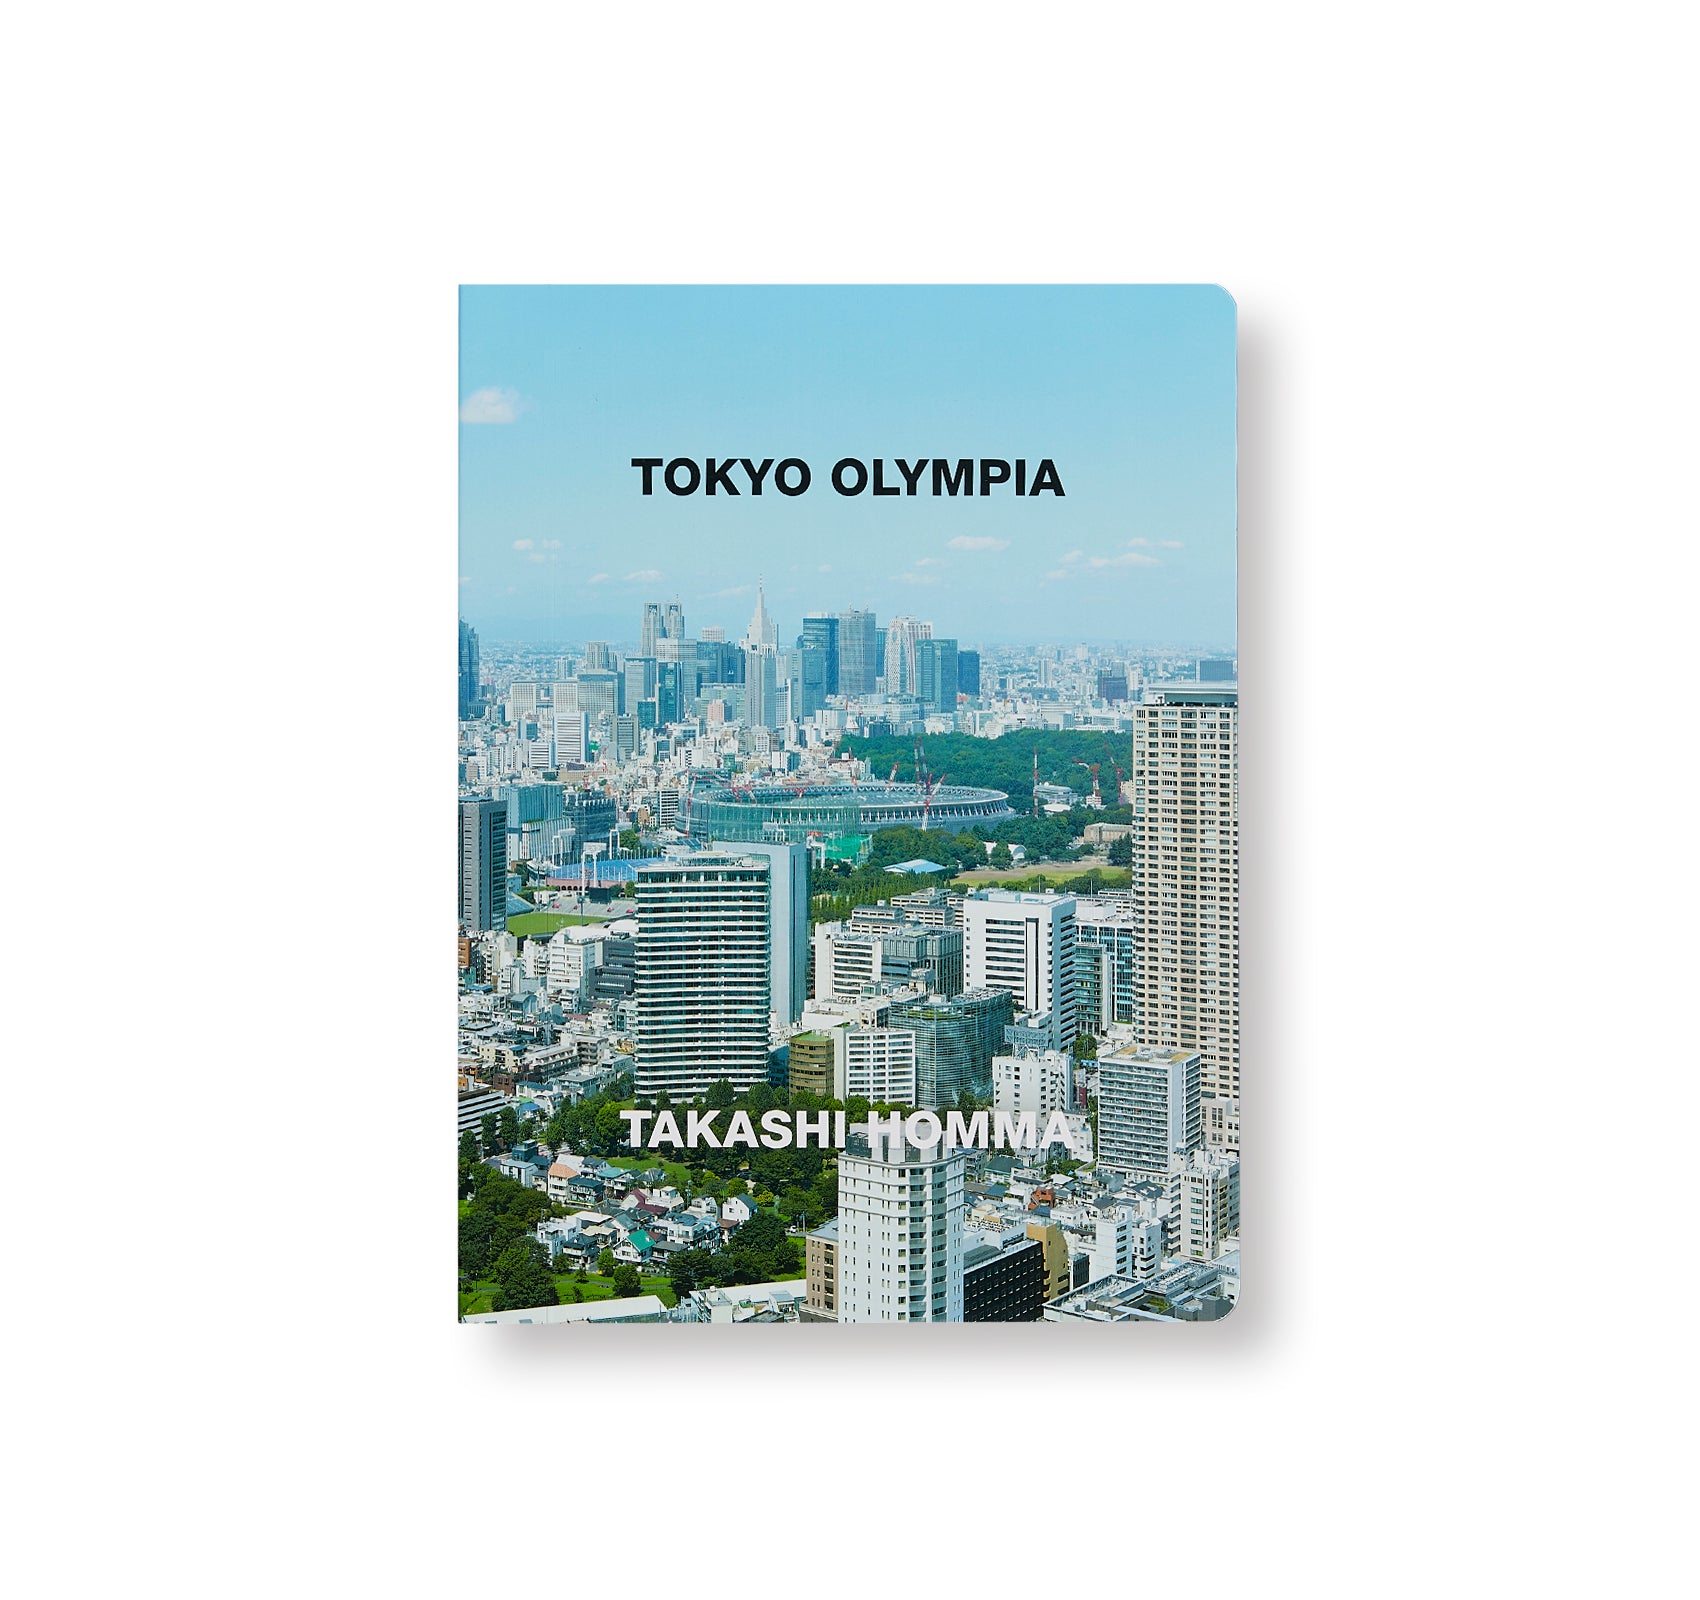 TOKYO OLYMPIA by Takashi Homma [SIGNED]